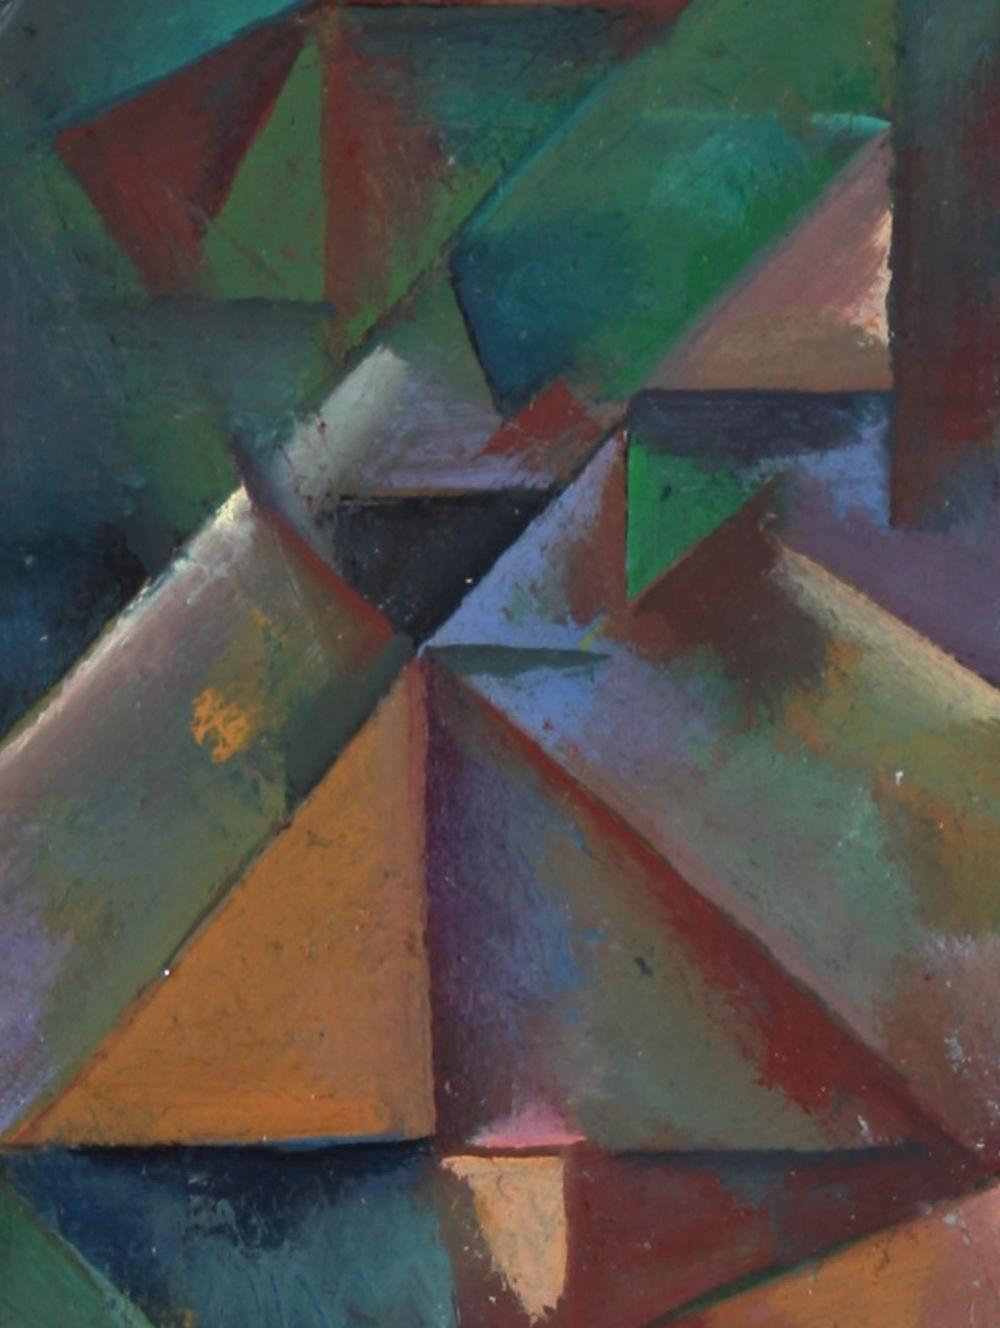 Desaturated Triangular Grid Late 20th Century Oil on Paper - Painting by Schuyler Standish